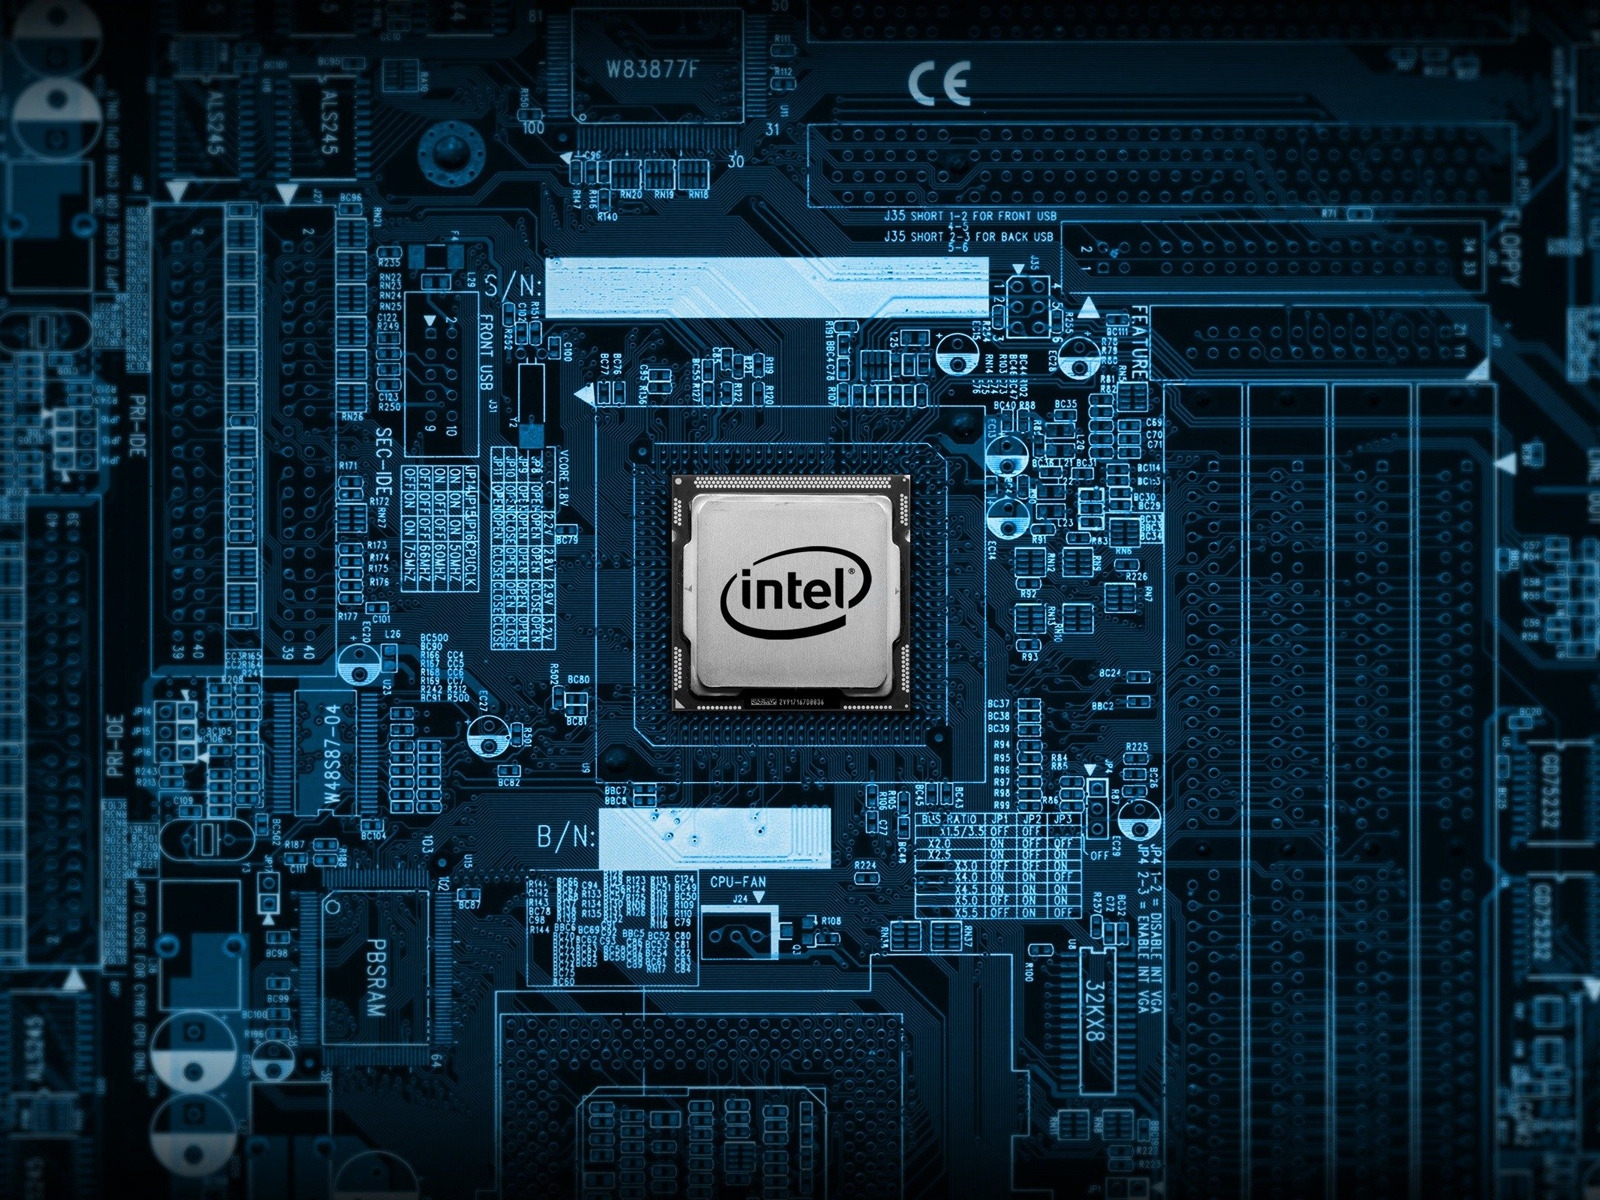 Intel CPU for 1600 x 1200 resolution